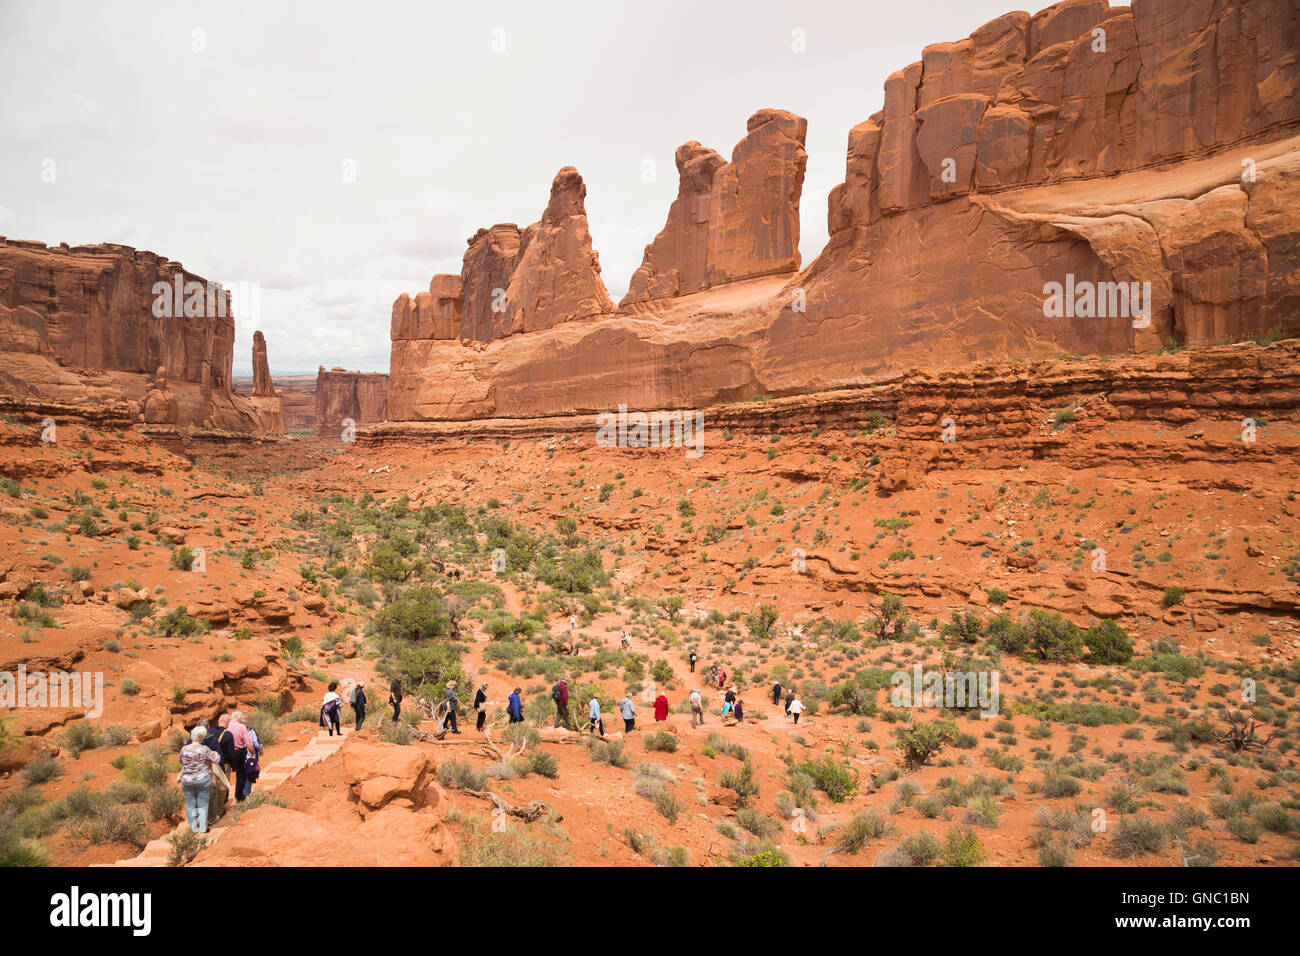 Tourists walking single file on Park Avenue Trail in Arches National Park Moab Urtah Stock Photo